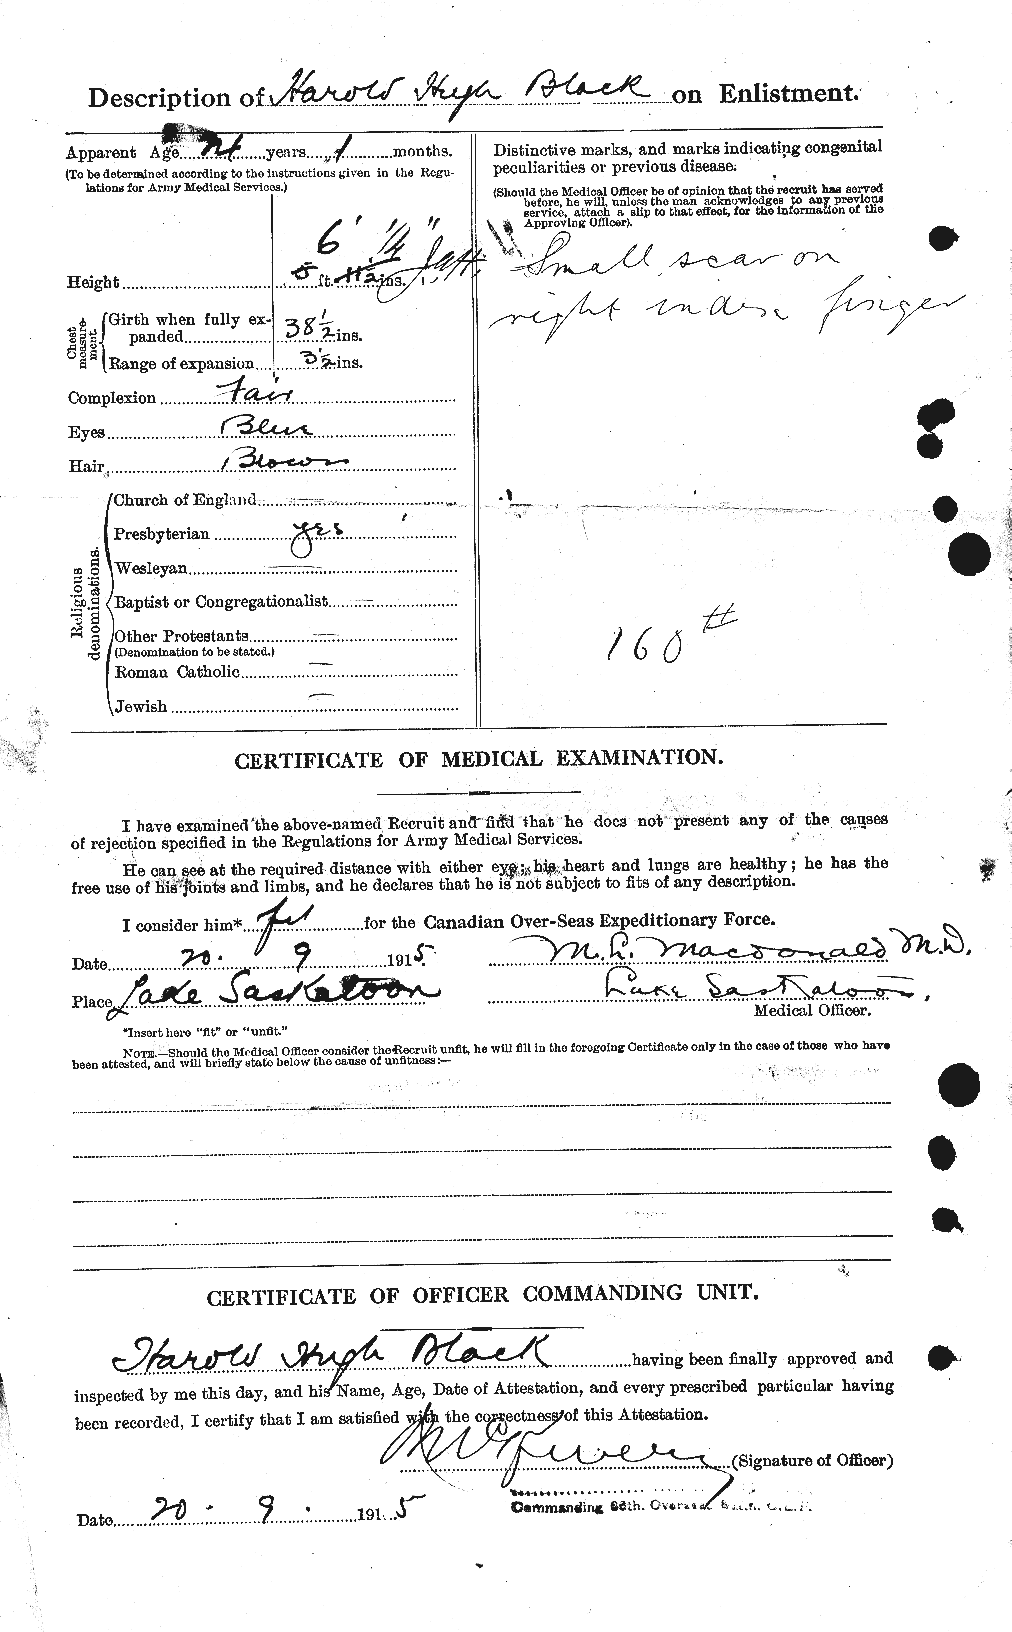 Personnel Records of the First World War - CEF 241391b